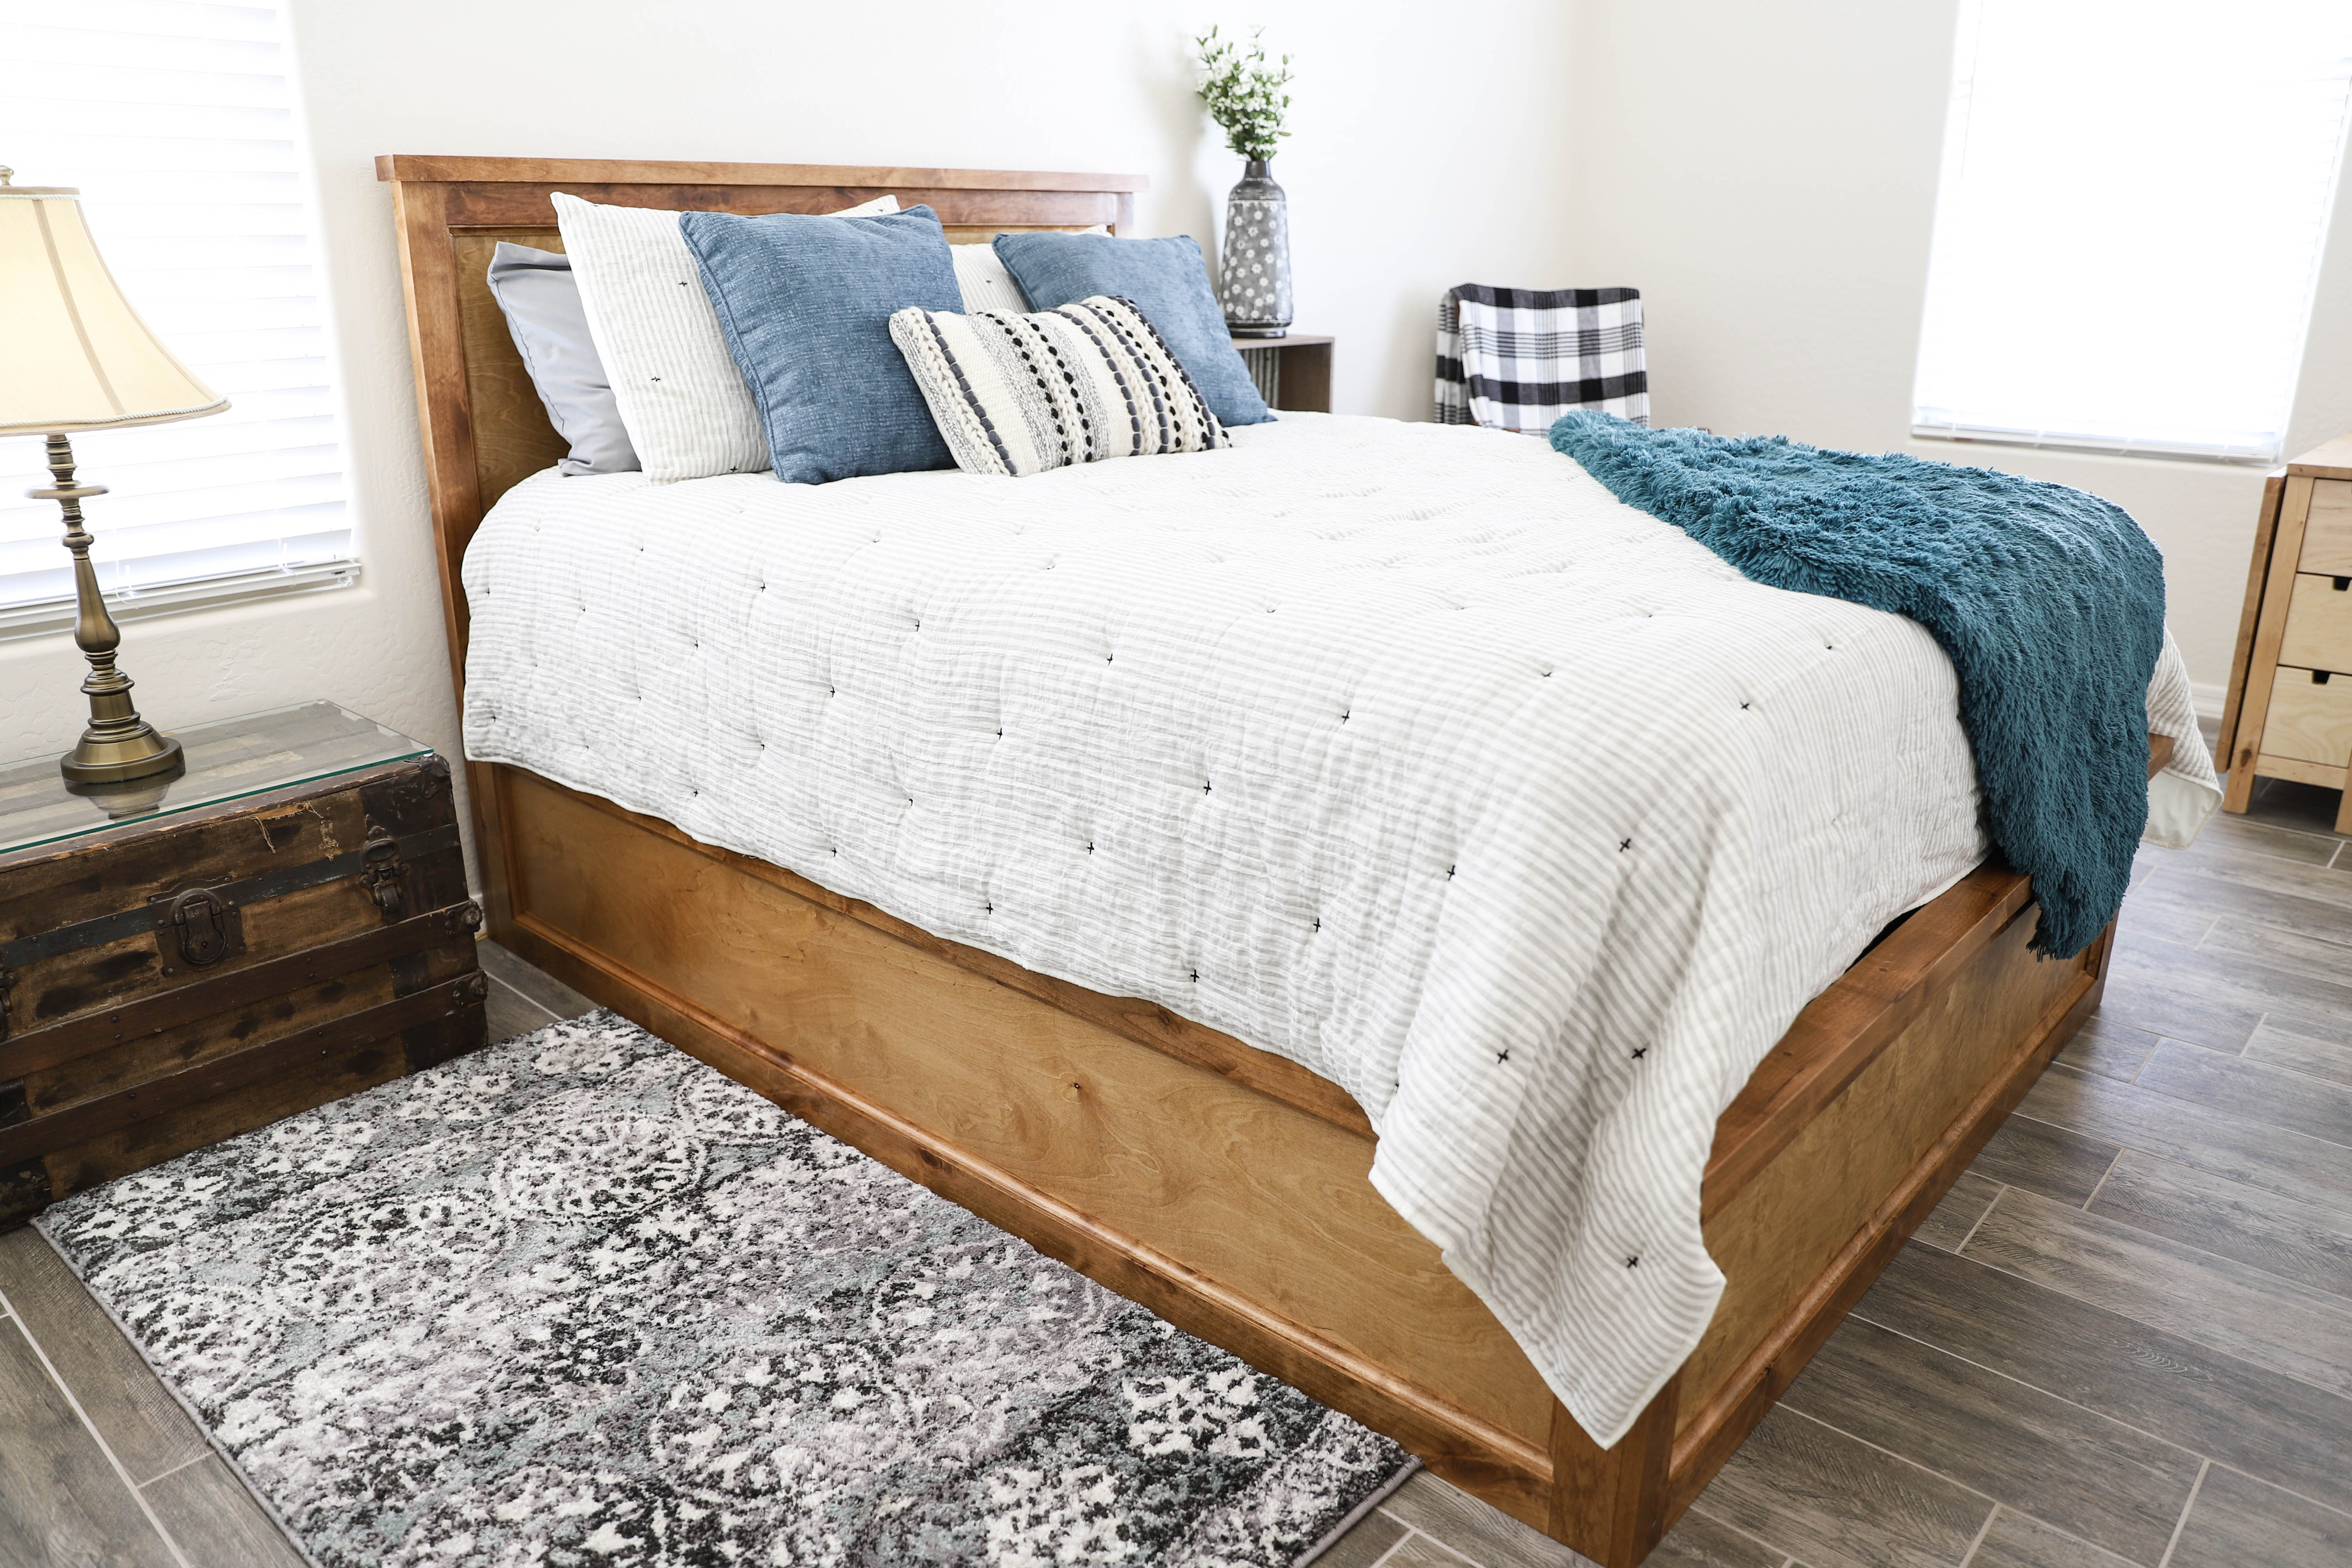 How To Build A Queen Size Storage Bed, How To Build A Homemade Wood Bed Frame Queen